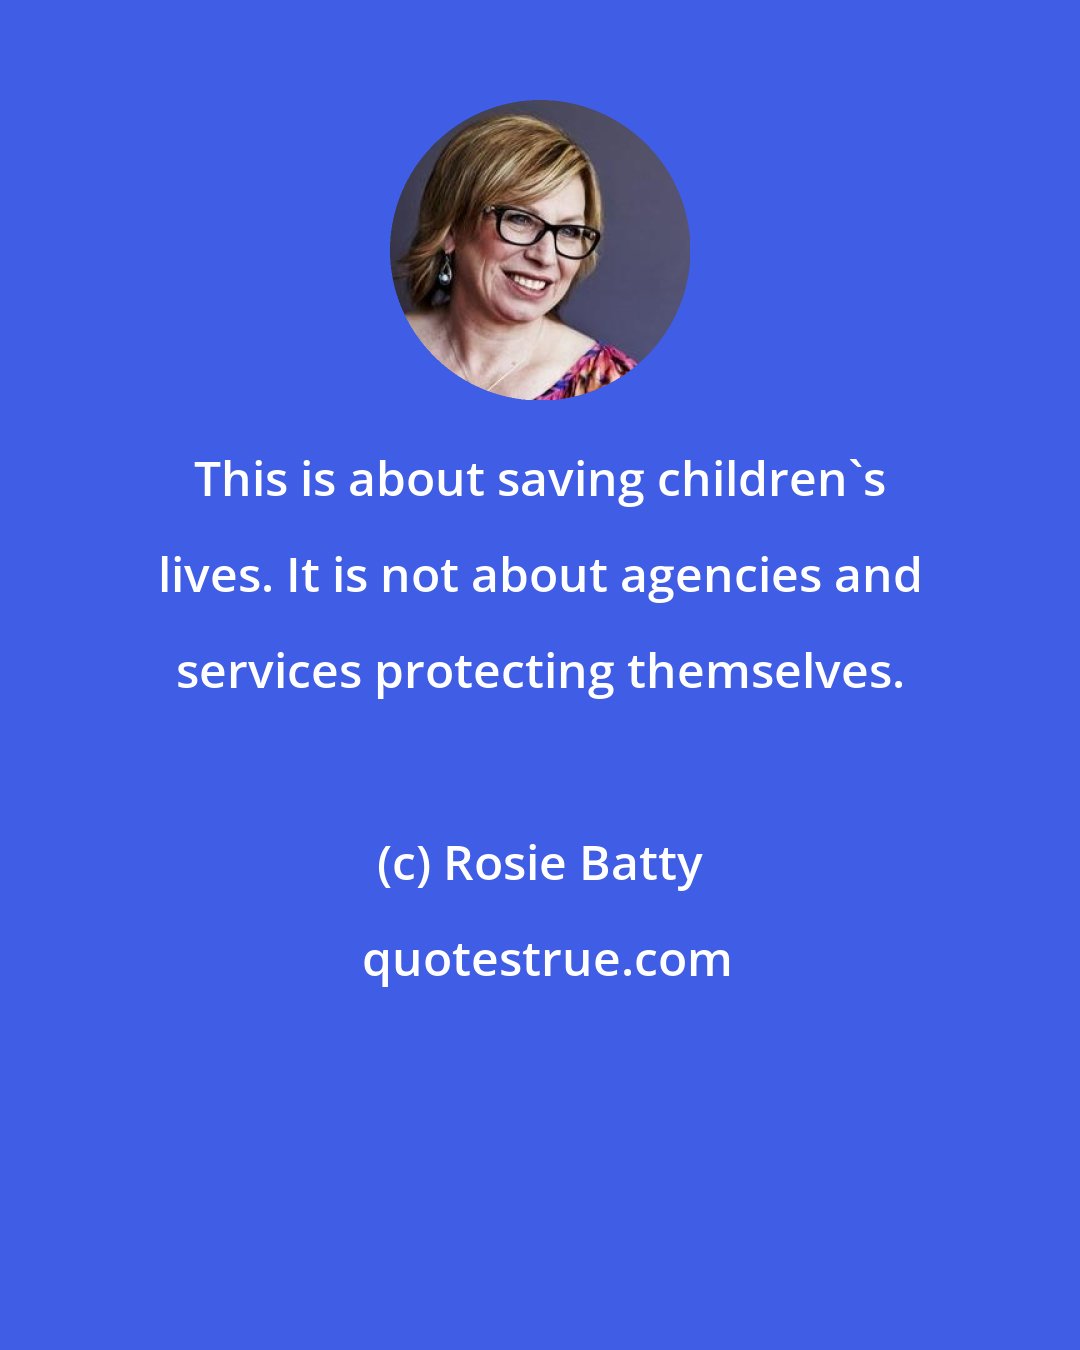 Rosie Batty: This is about saving children's lives. It is not about agencies and services protecting themselves.